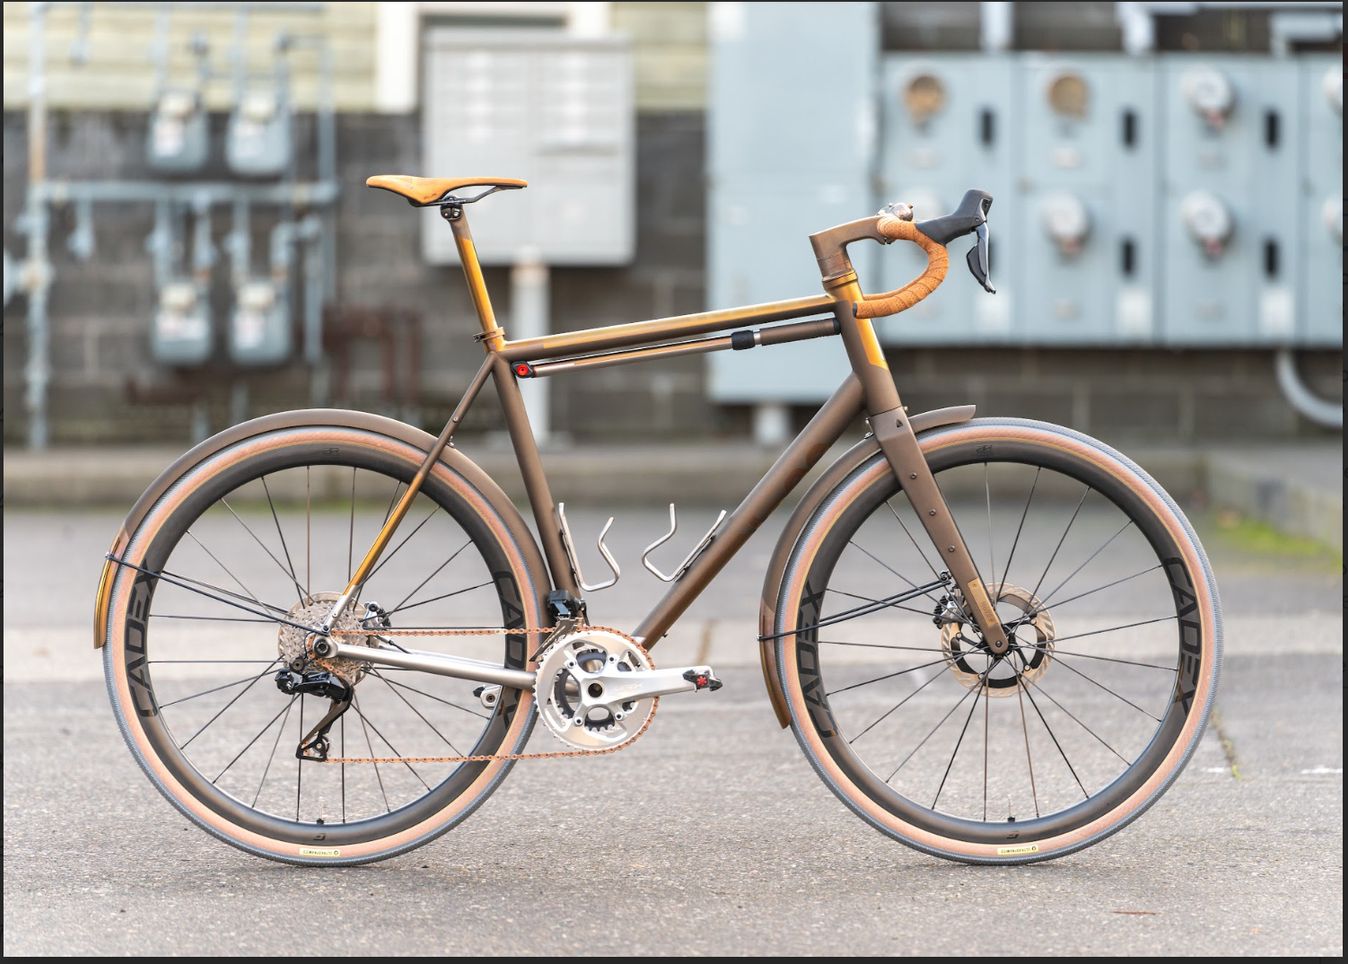 This custom No22 Drifter with 12-speed Dura-ace and limited silver GRX is definitely an eye catcher